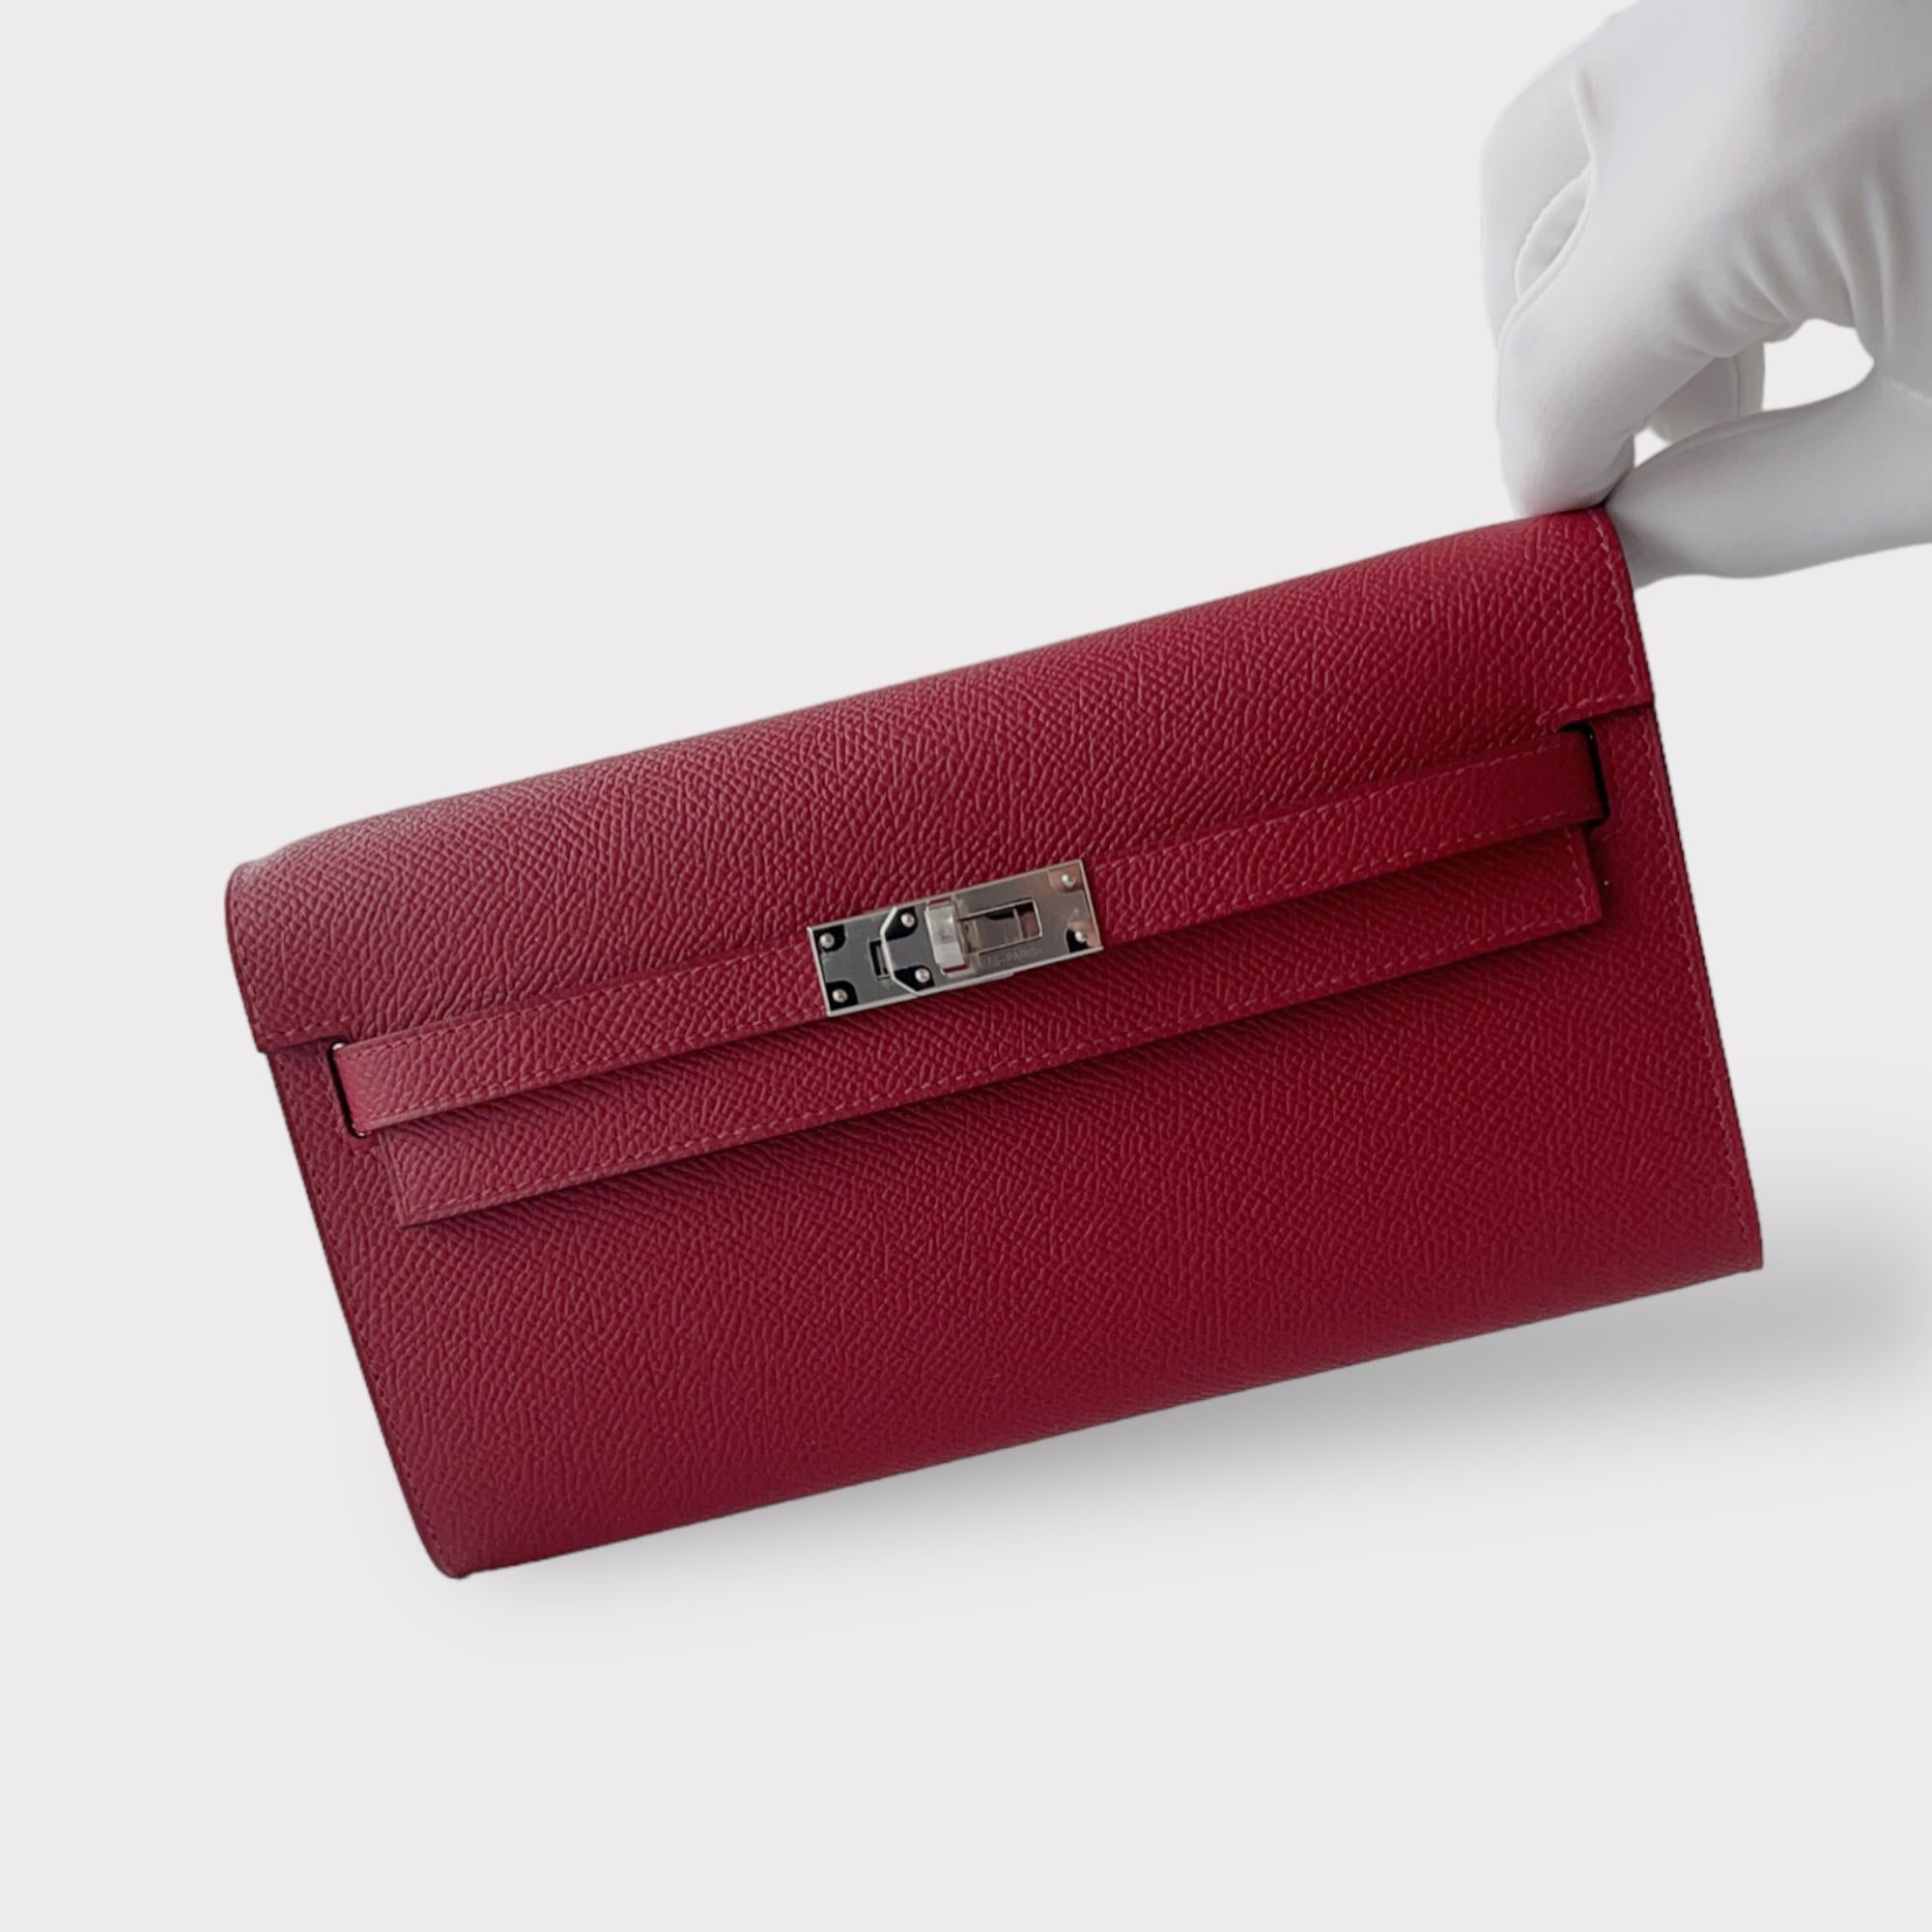 Shop this eye catching Hermes Kelly Classique To Go Wallet, In Red, Rouge Grenat With Palladium Hardware. It is crafted in Epsom Leather and comes with a strap which makes the wallet usable as both a clutch and a bag. There are 4 credit card slots